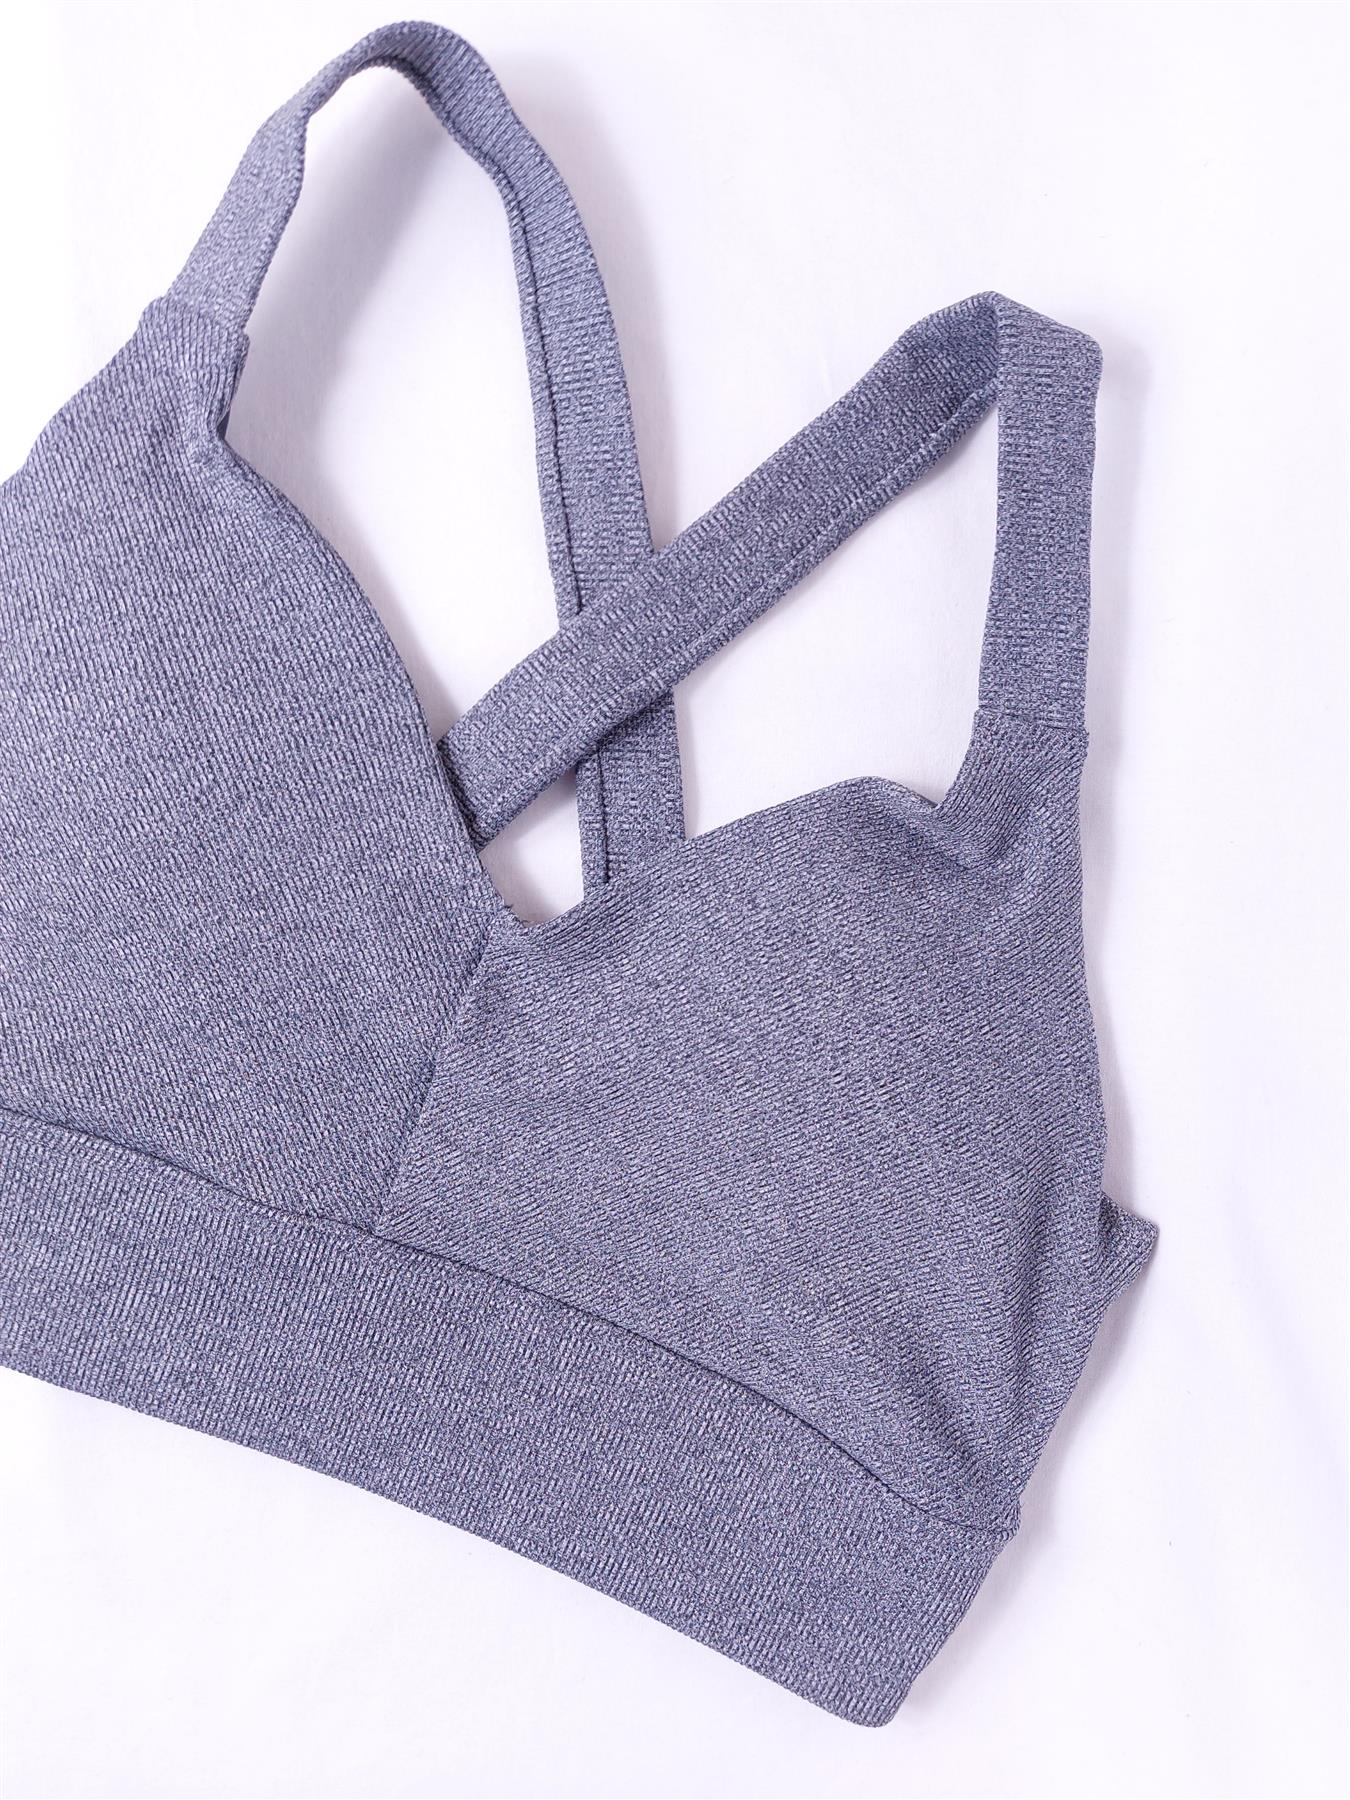 Freely Academy Yoga Top Sports Bra Non-Wired Lightly Padded Crossback Ribbed Gym